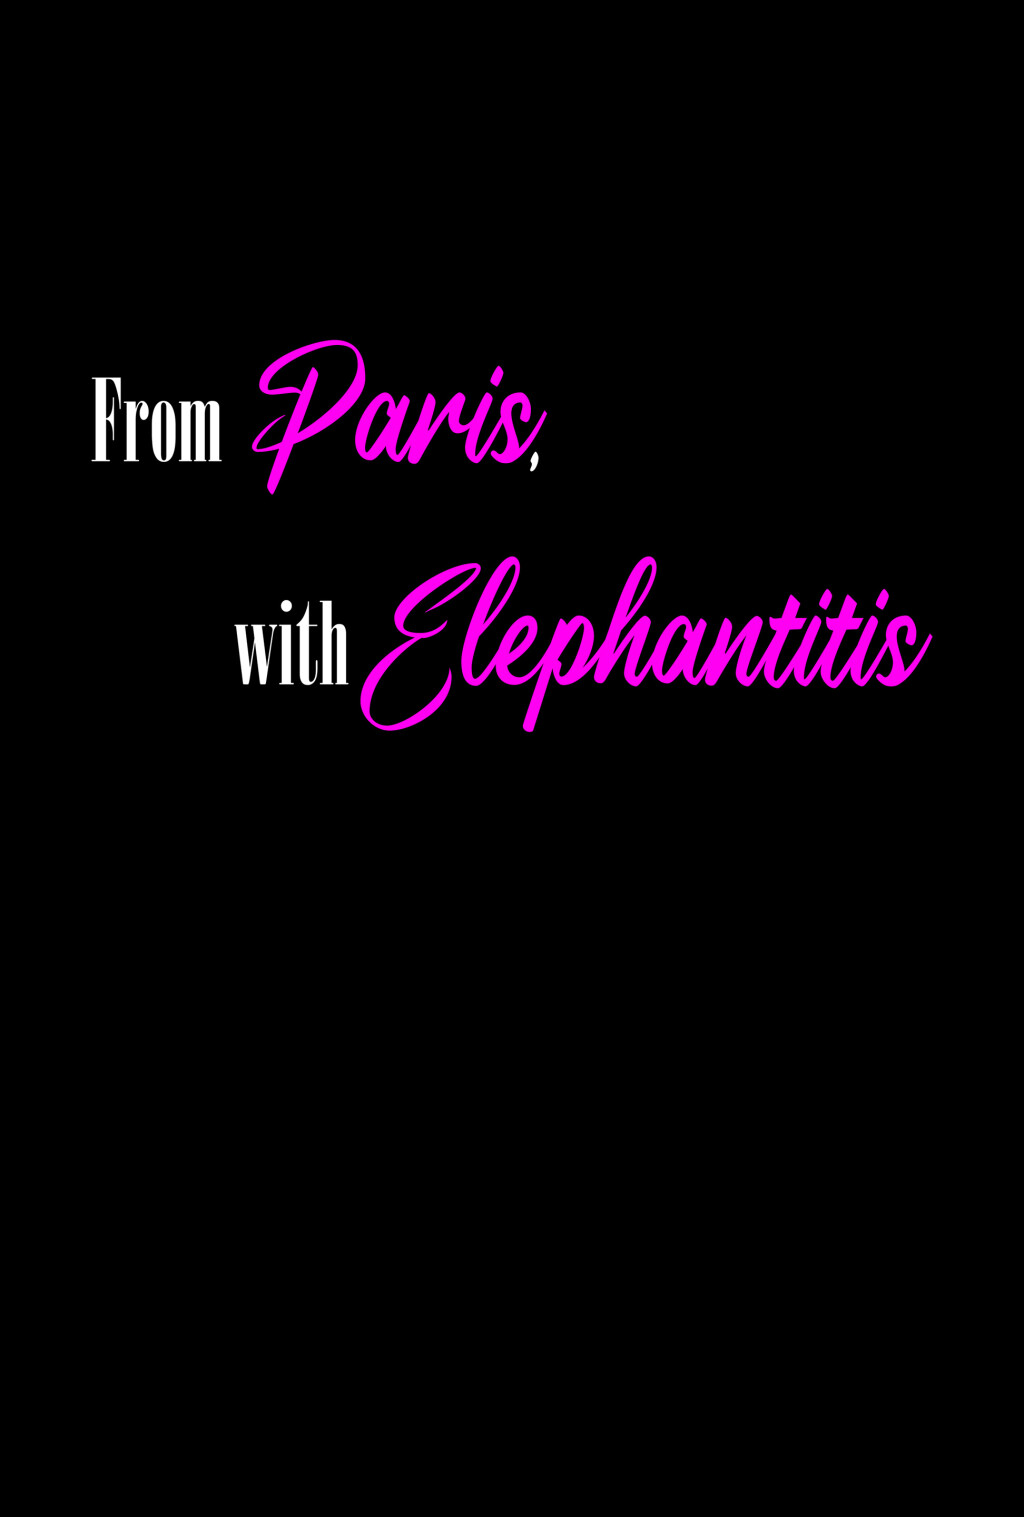 Filmposter for From Paris, With Elephantitis